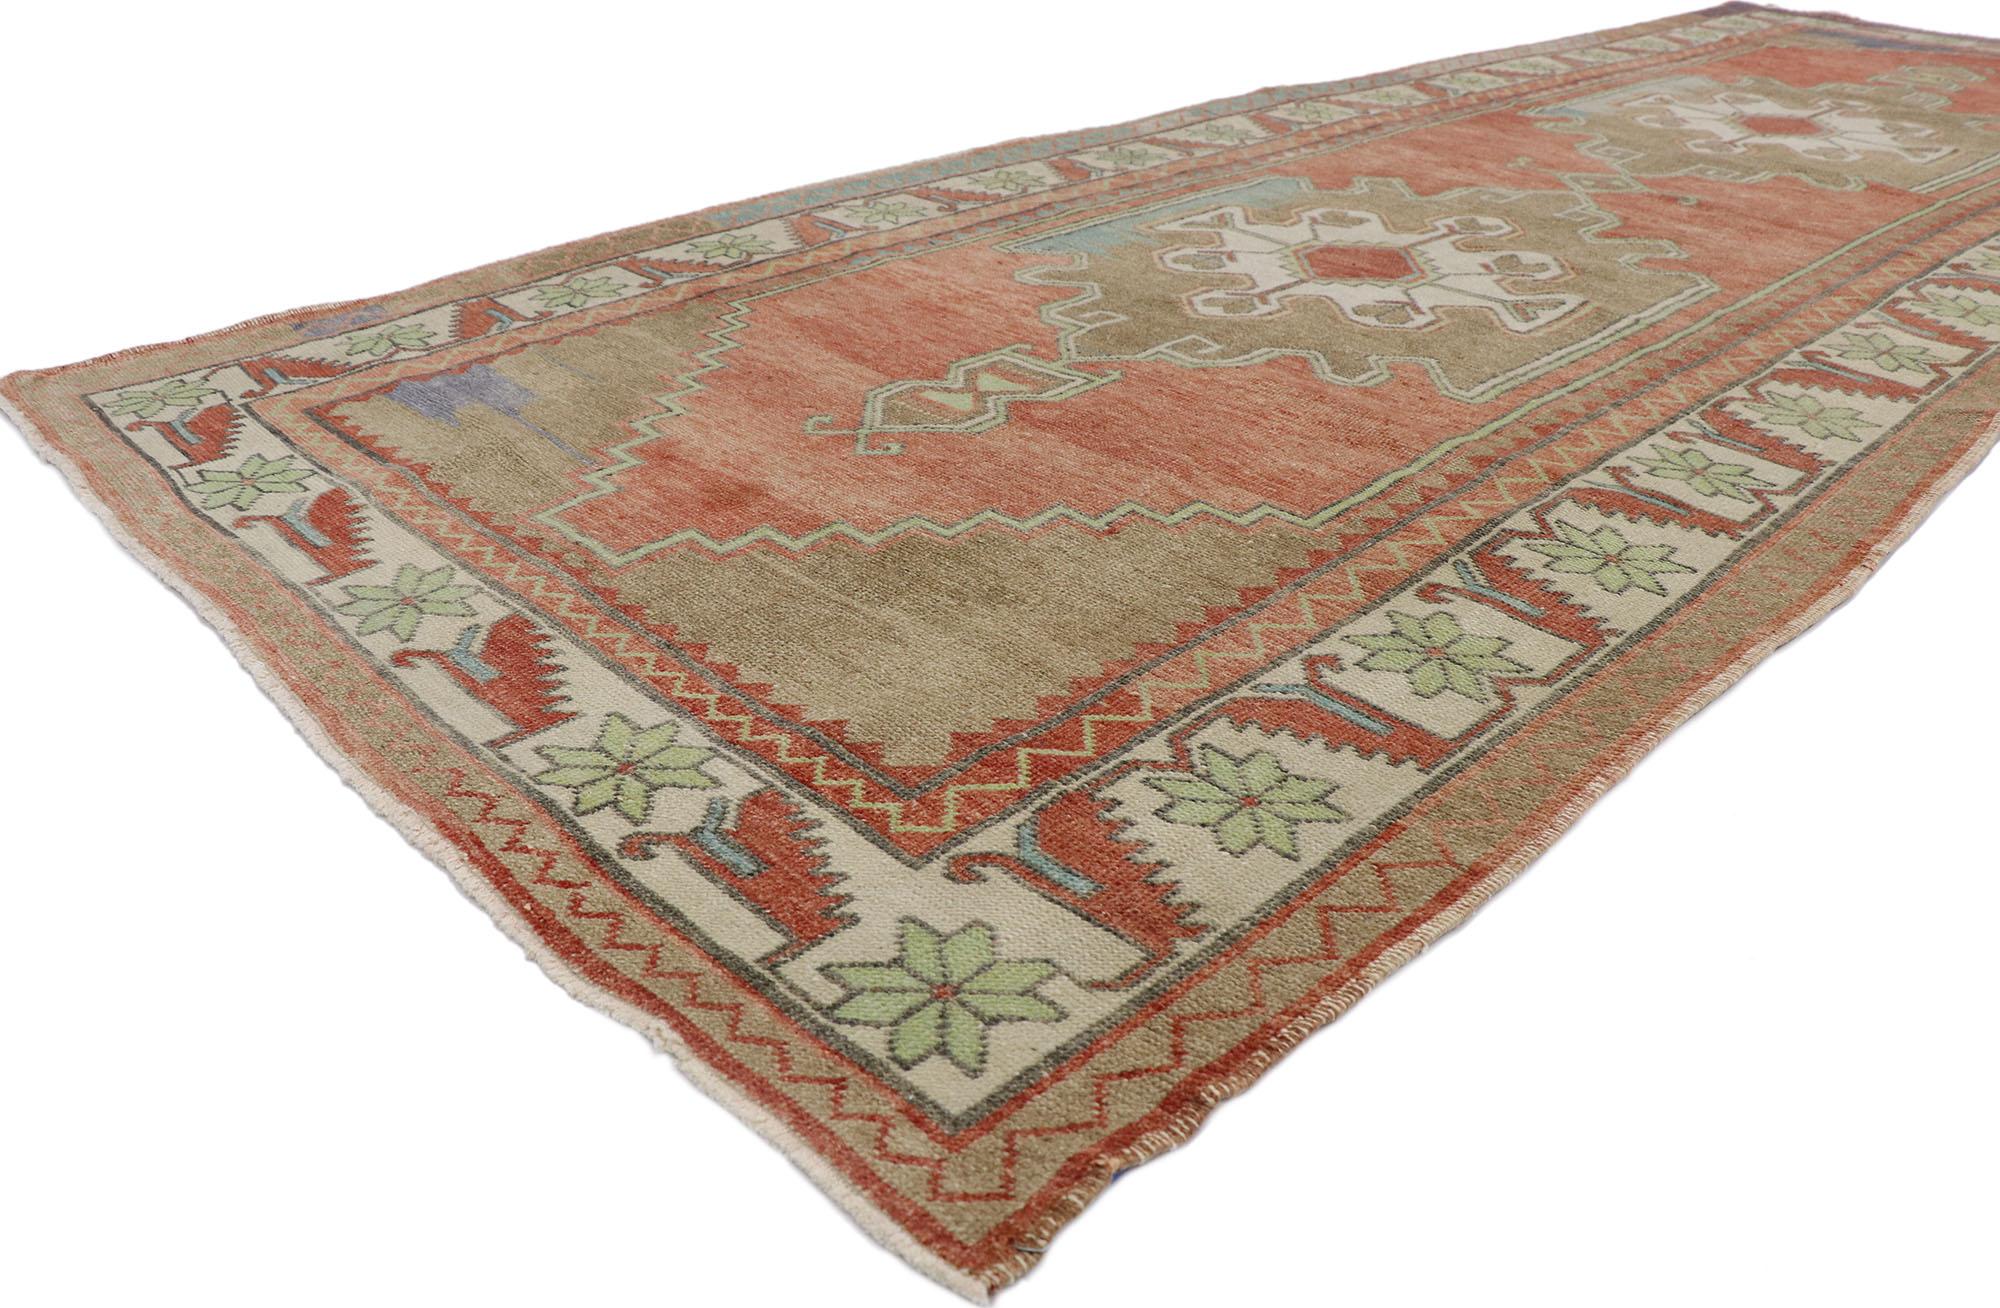 53628 Vintage Turkish Oushak Rug, 04'07 x 12'07.
Rustic sensibility meets nomadic charm in this hand knotted wool vintage Turkish Oushak rug. The intrinsic tribal design and earthy color palette woven into this piece work together creating a modern